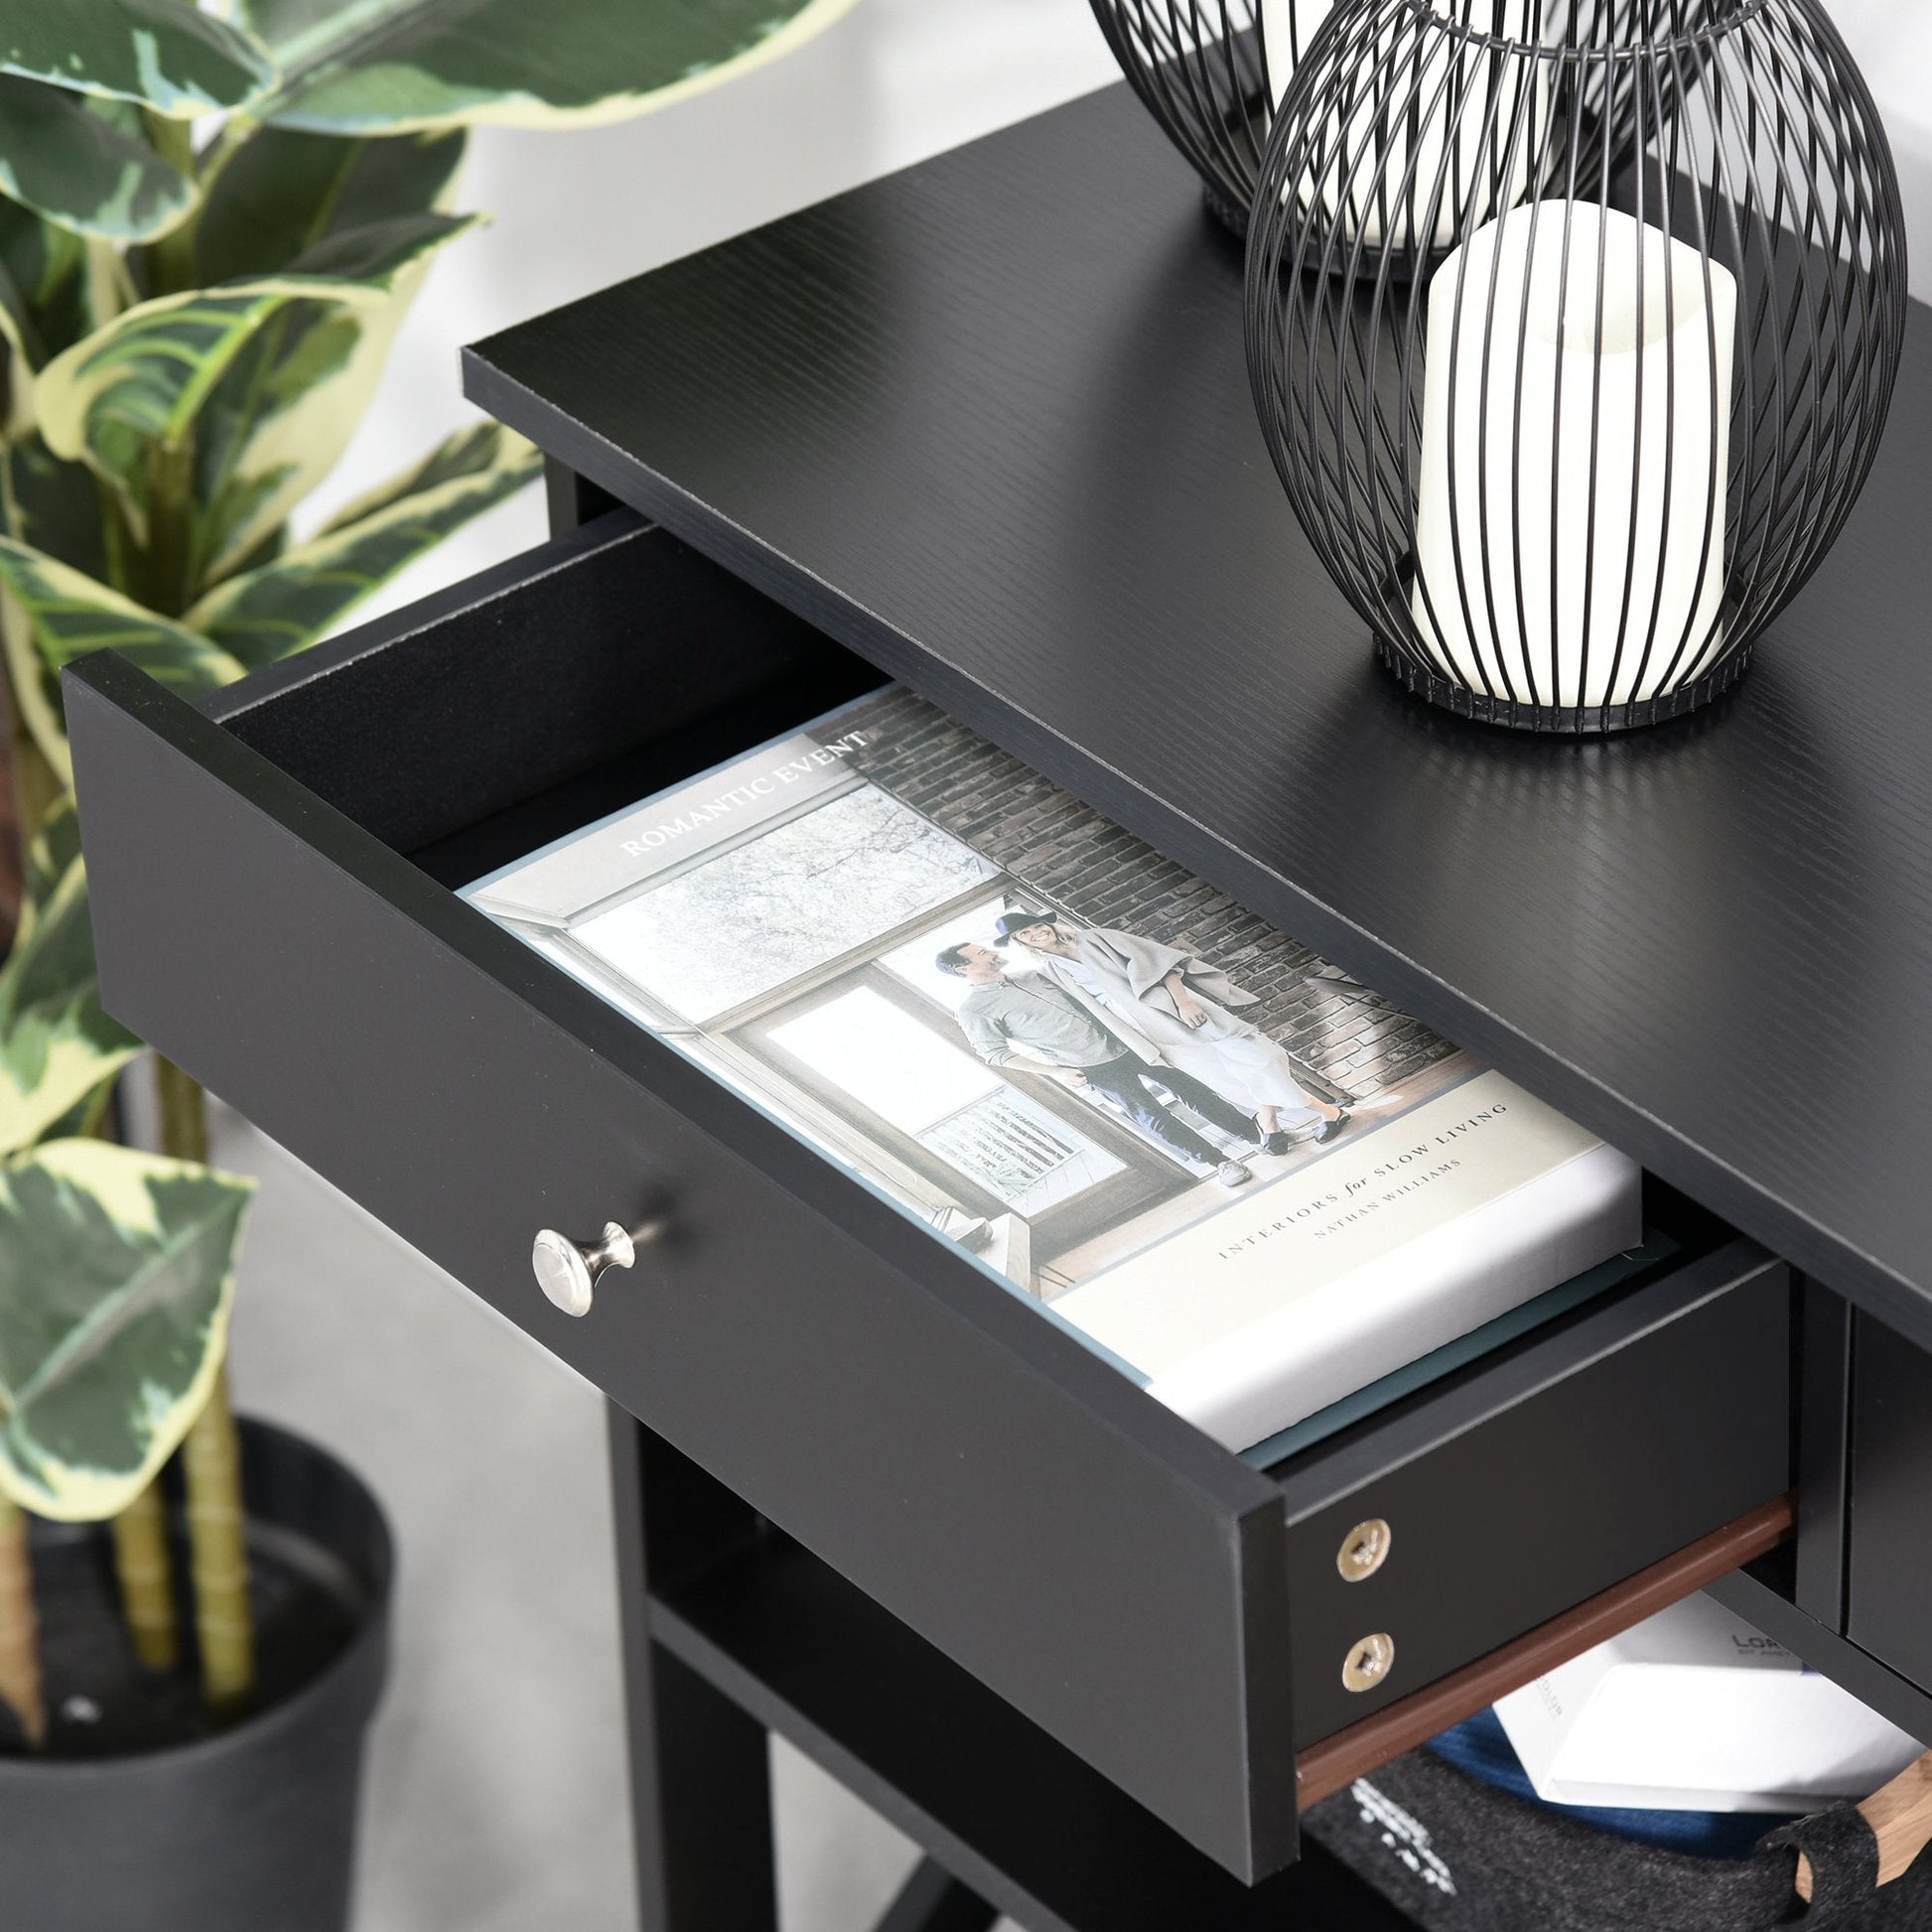 Console Table Sofa Side Desk with Storage Shelves Drawers X Frame for Living Room Entryway Black at Gallery Canada